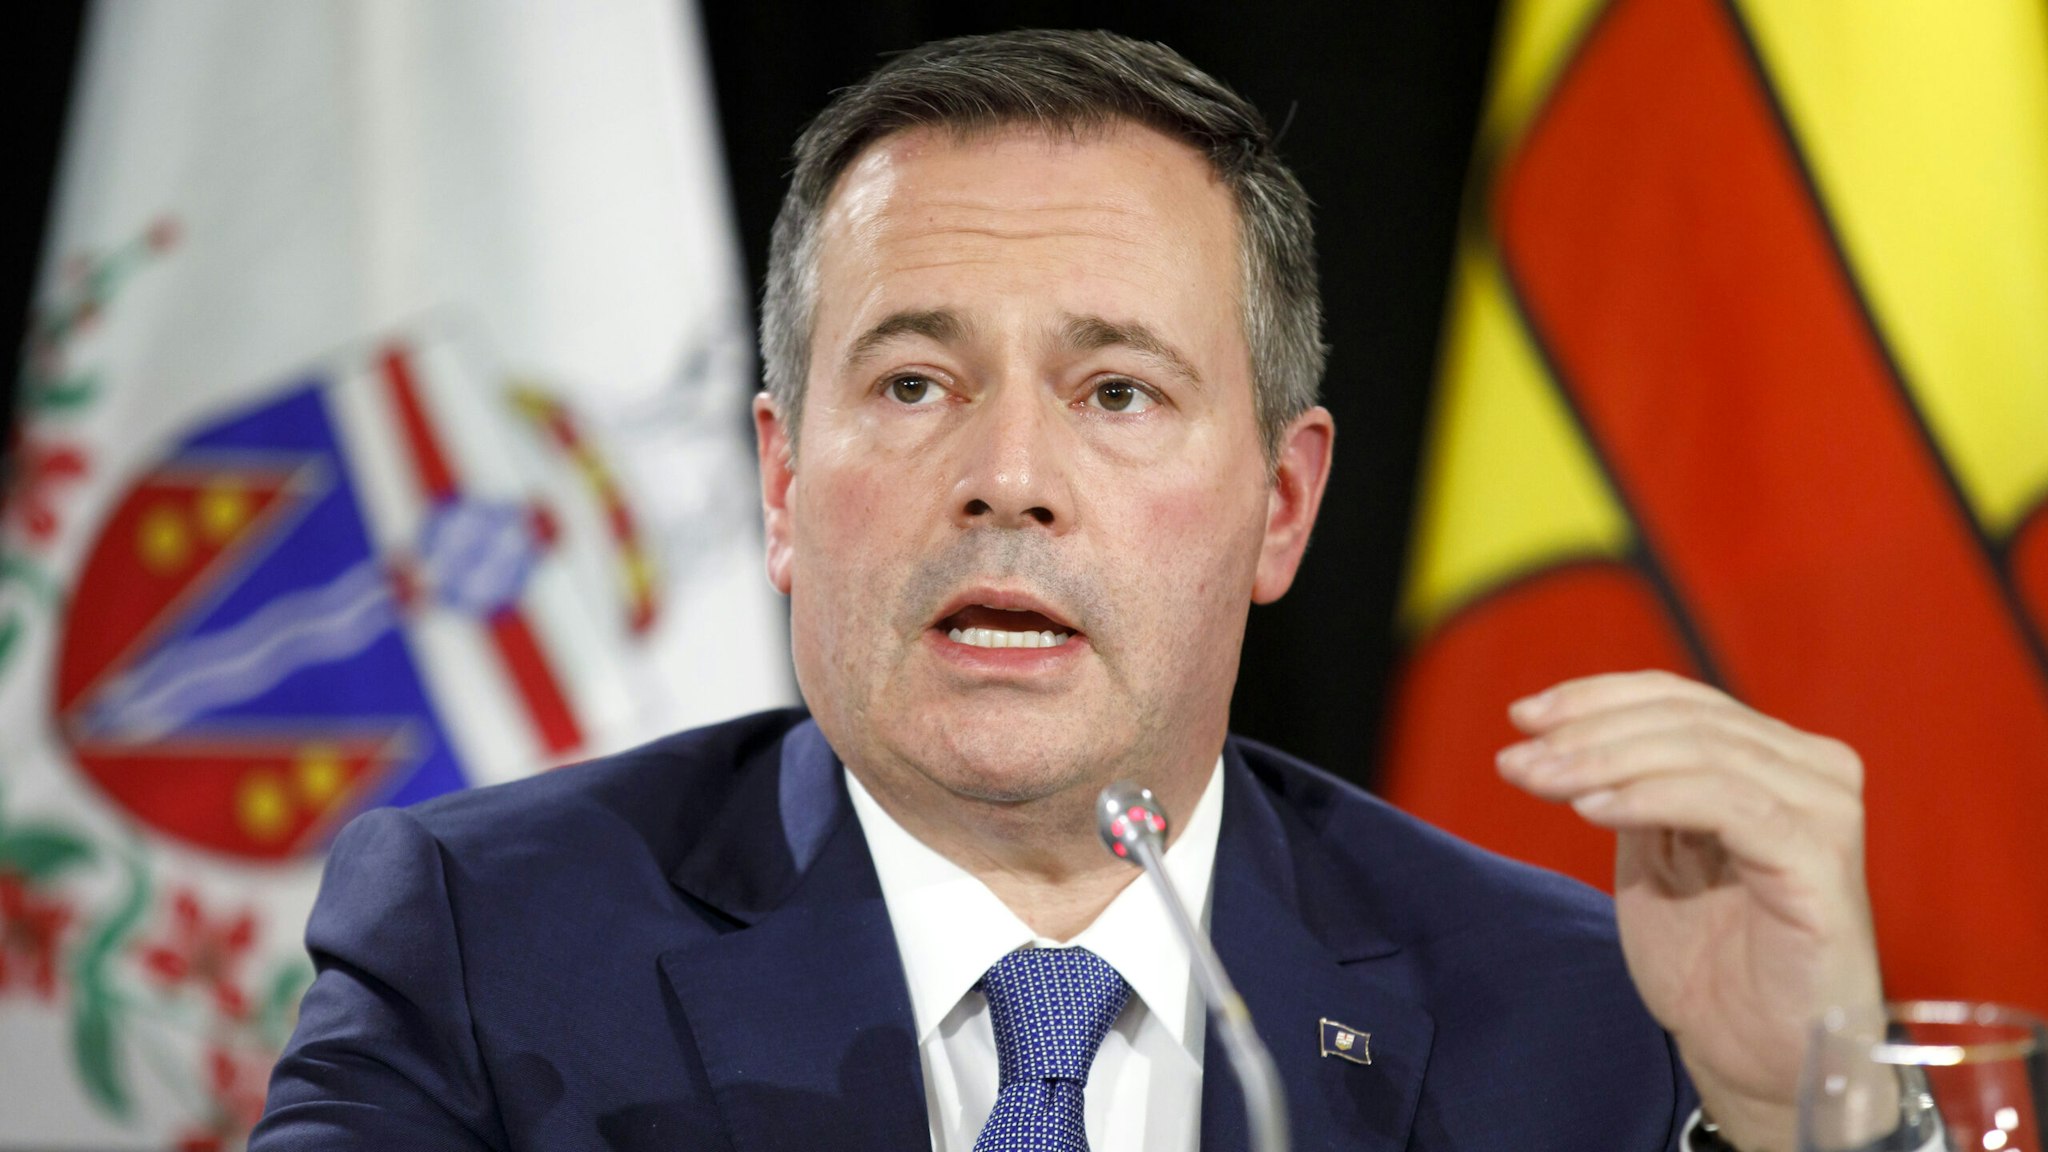 Jason Kenney, Alberta's premier, speaks during a news conference following the Canada's Premiers meeting in Toronto, Ontario, Canada, on Monday, Dec. 2, 2019. The premiers will put together a list of priorities to present to Prime Minister Justin Trudeau at the first ministers' meeting, expected in January.